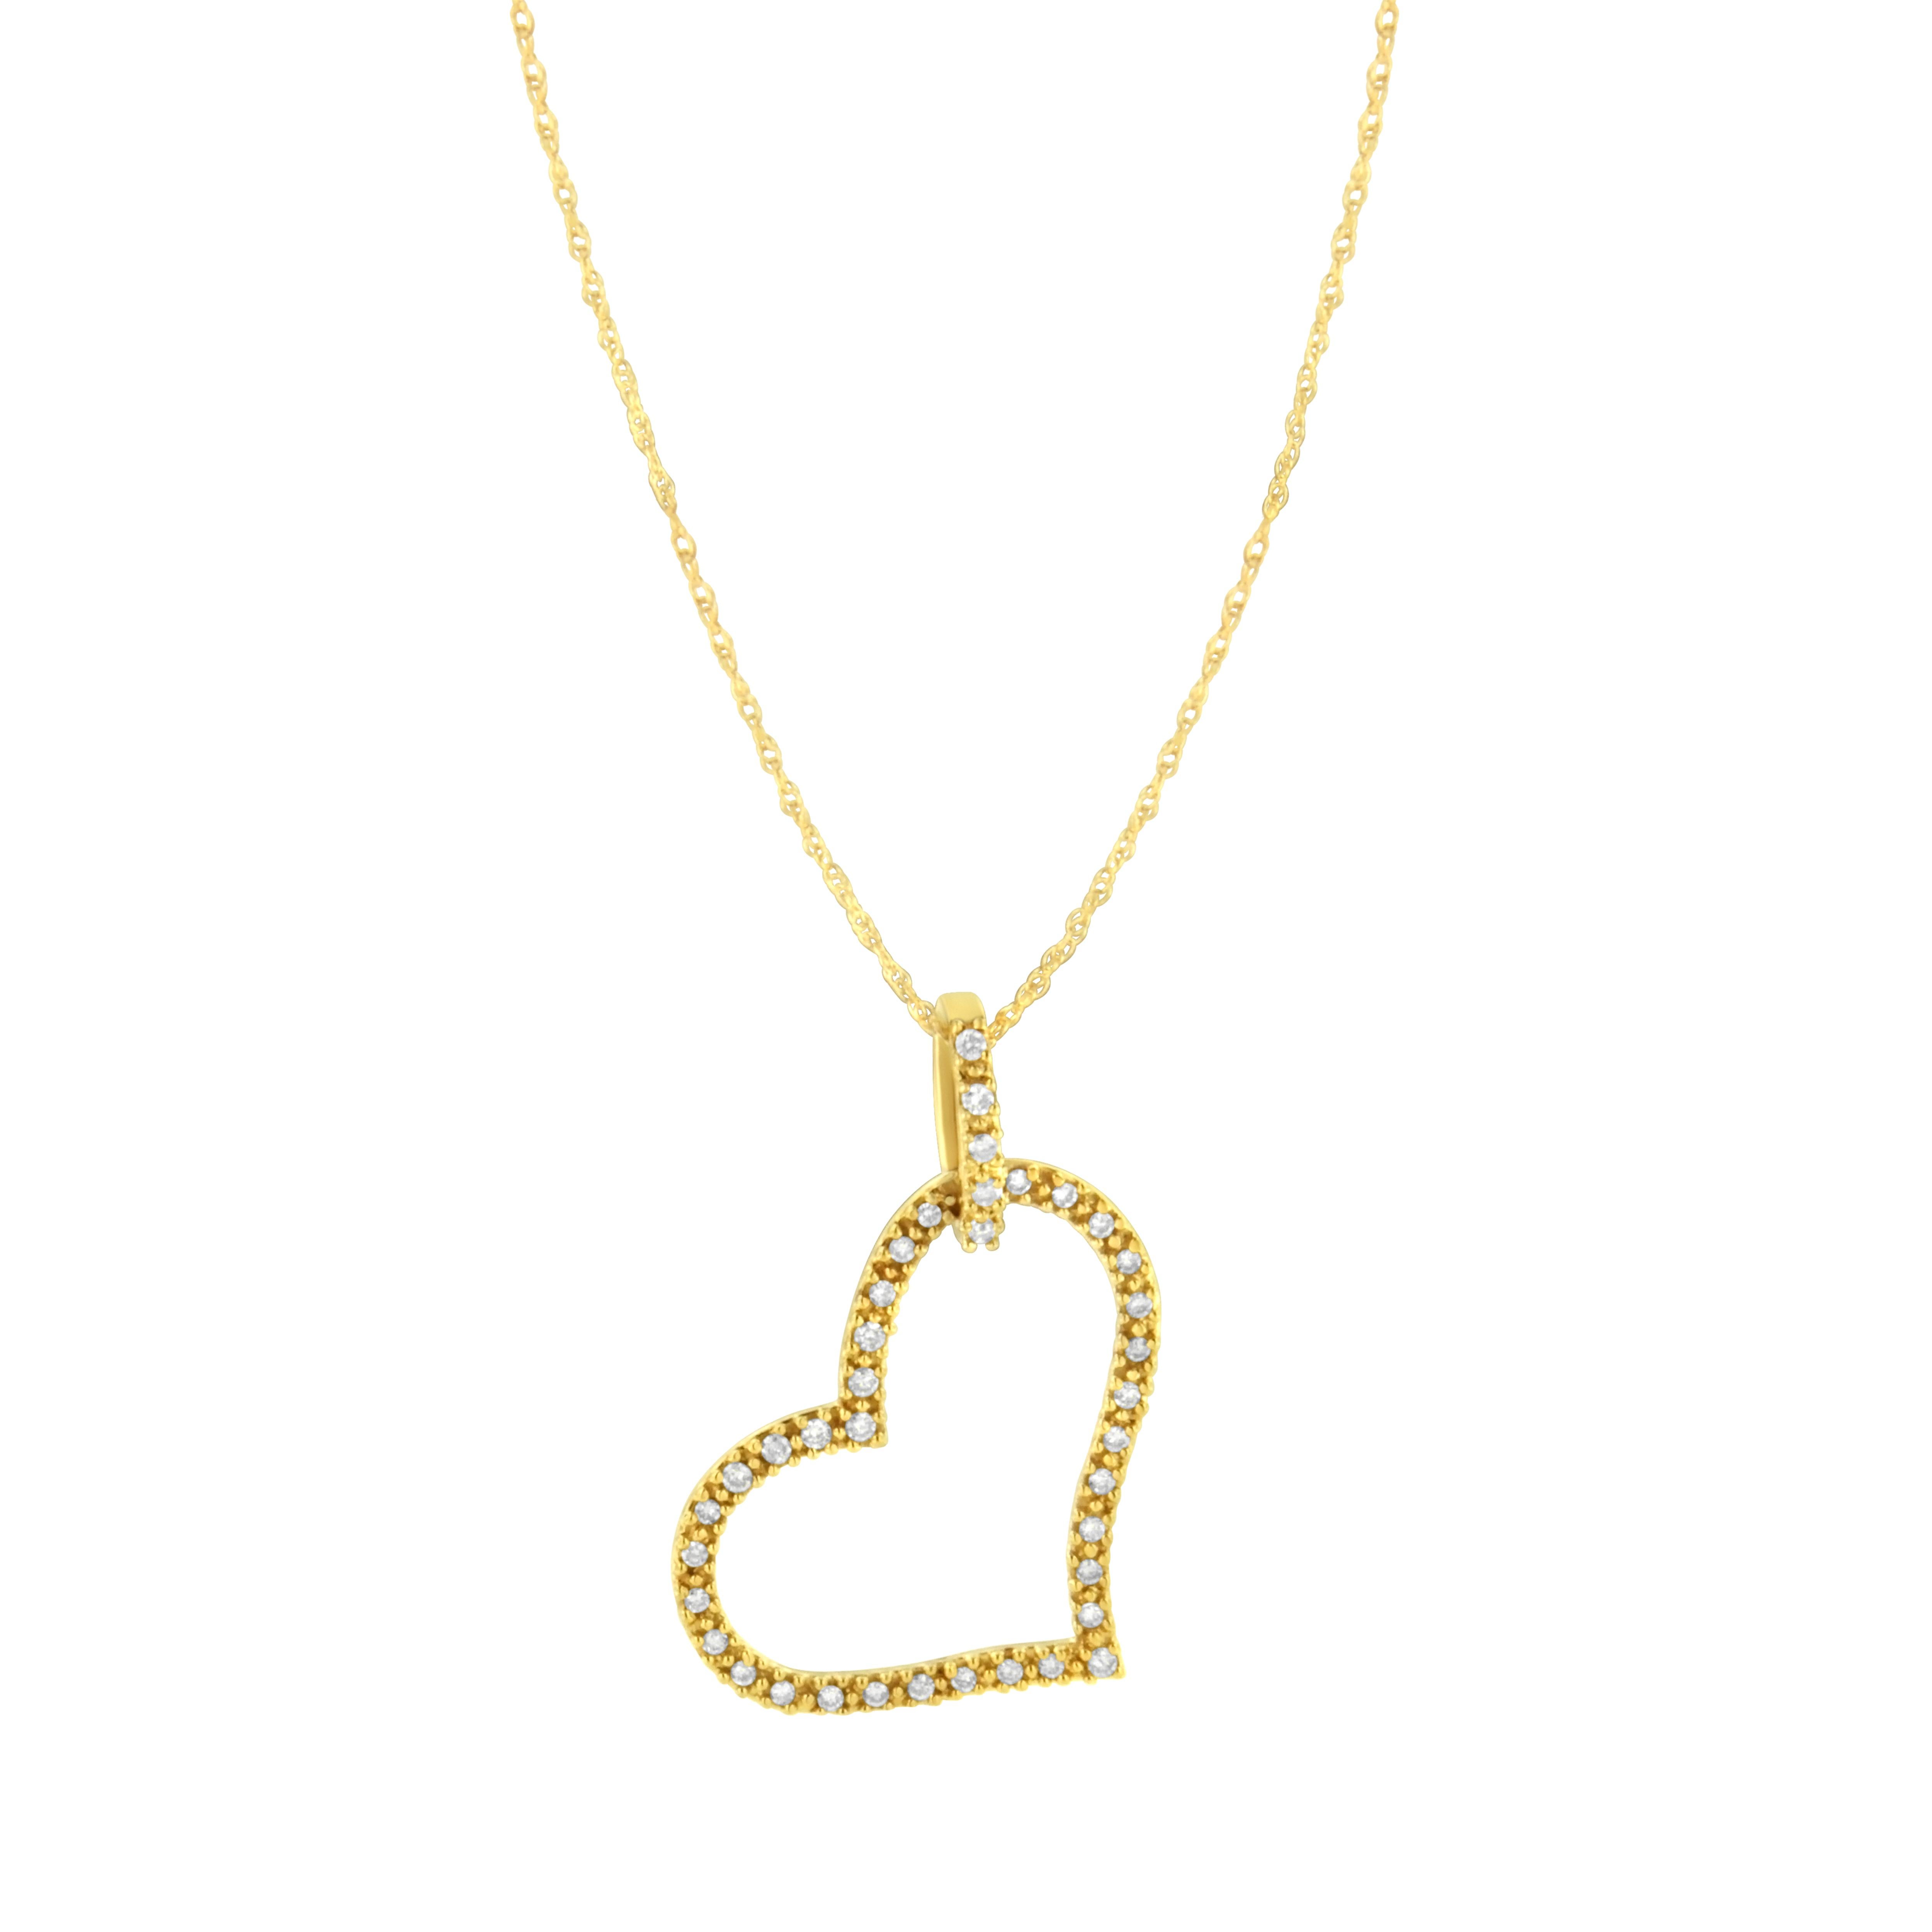 This Diamond Heart Pendant makes a charming gift for your sweet heart. The enchanting yellow gold heart hangs askew from a sleek yellow gold bail and is adorned with 39 brilliant round cut diamonds beautifully prong set and rendered with sparkle on